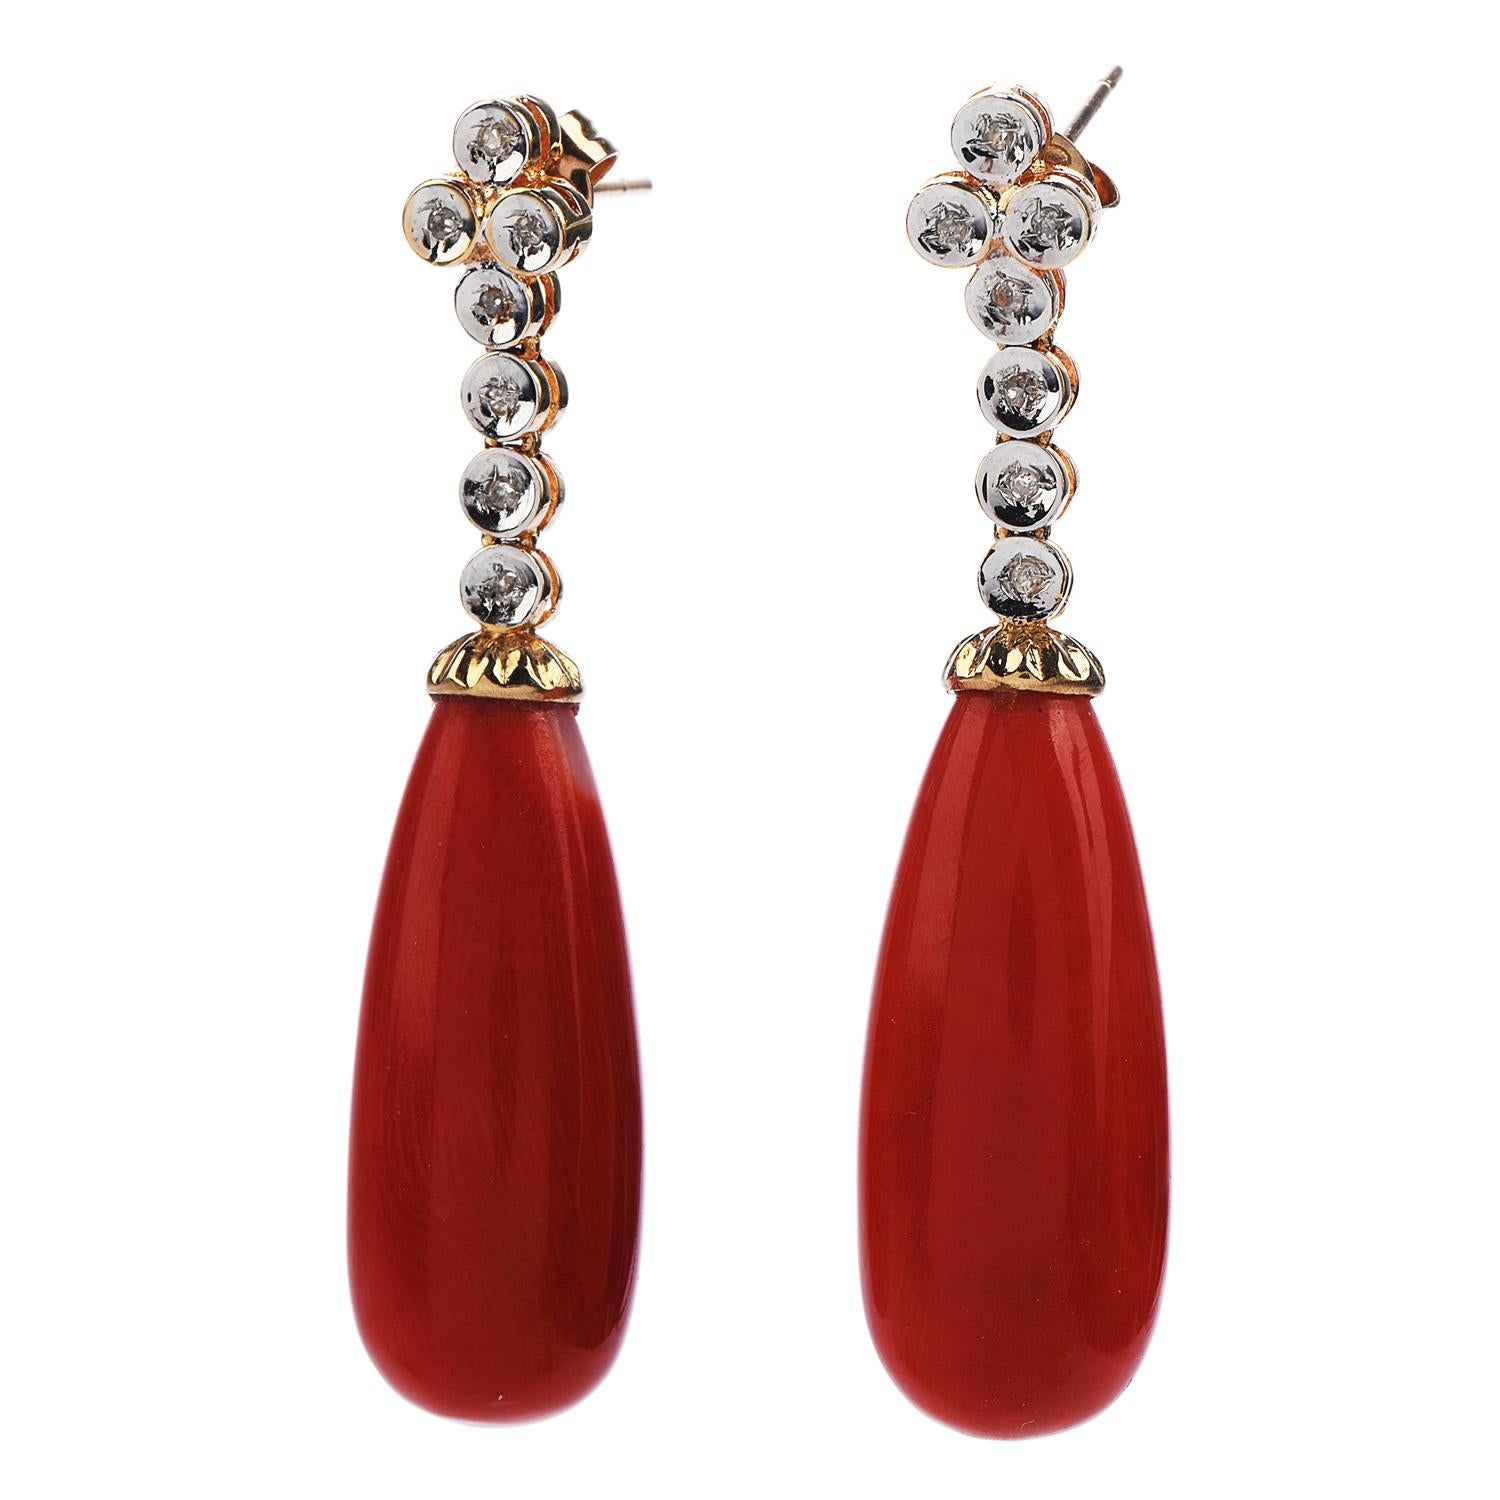 These Vintage Natural Coral & Diamond Drop Dangle Earrings

are crafted in Solid 14K Yellow Gold, with some White Gold Accents.

These 1960s earrings incorporate 2 natural corals of charming red orange color, pear drop shape with natural inclusions,